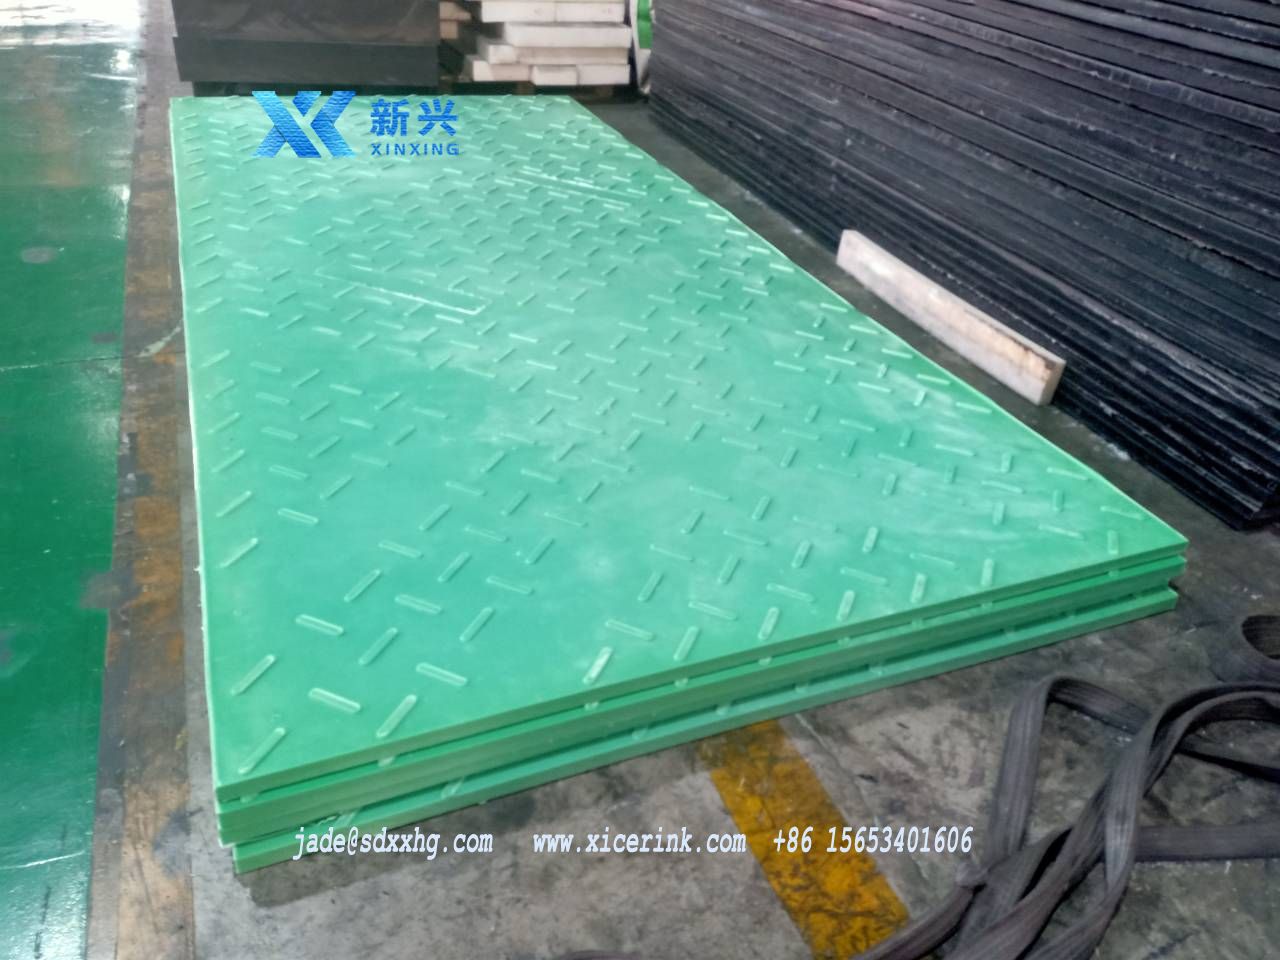 green heavy duty ground protection mats 2000x4000x38 mm